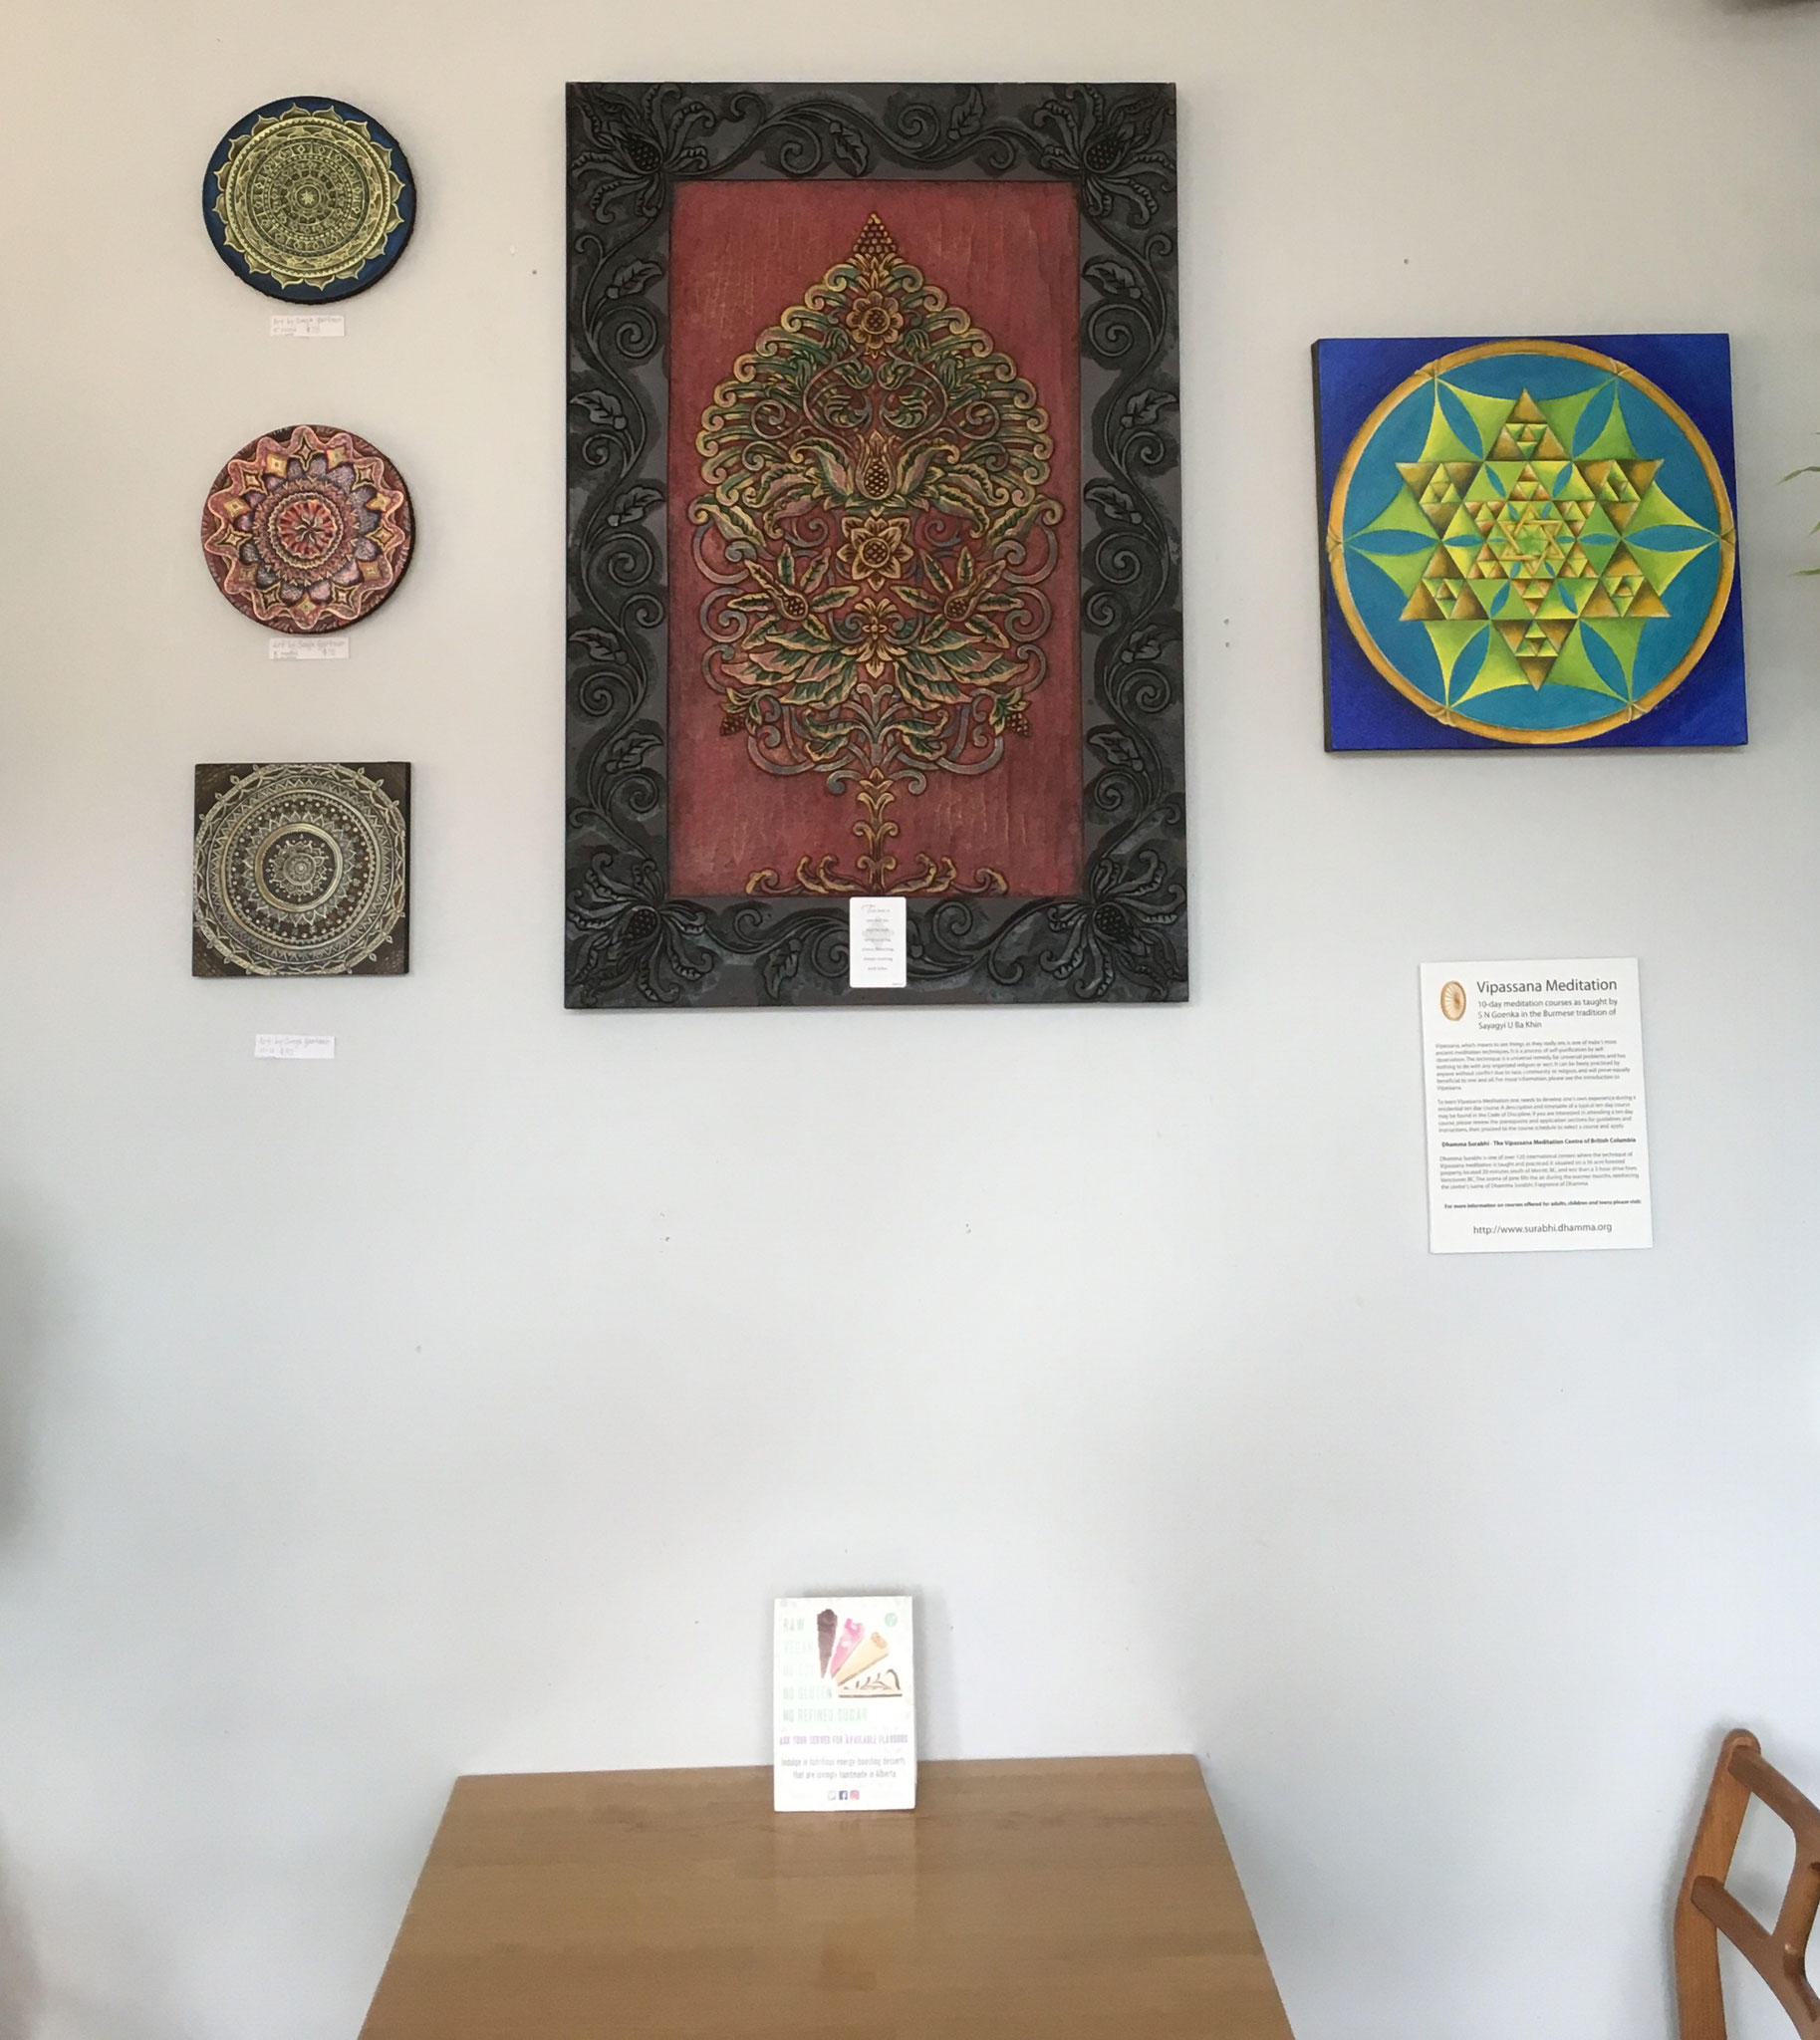 July 10/2017 to Aug.17/17 at the Lotus Seed Restaurant in Vancouver, B.C. (2 sold)